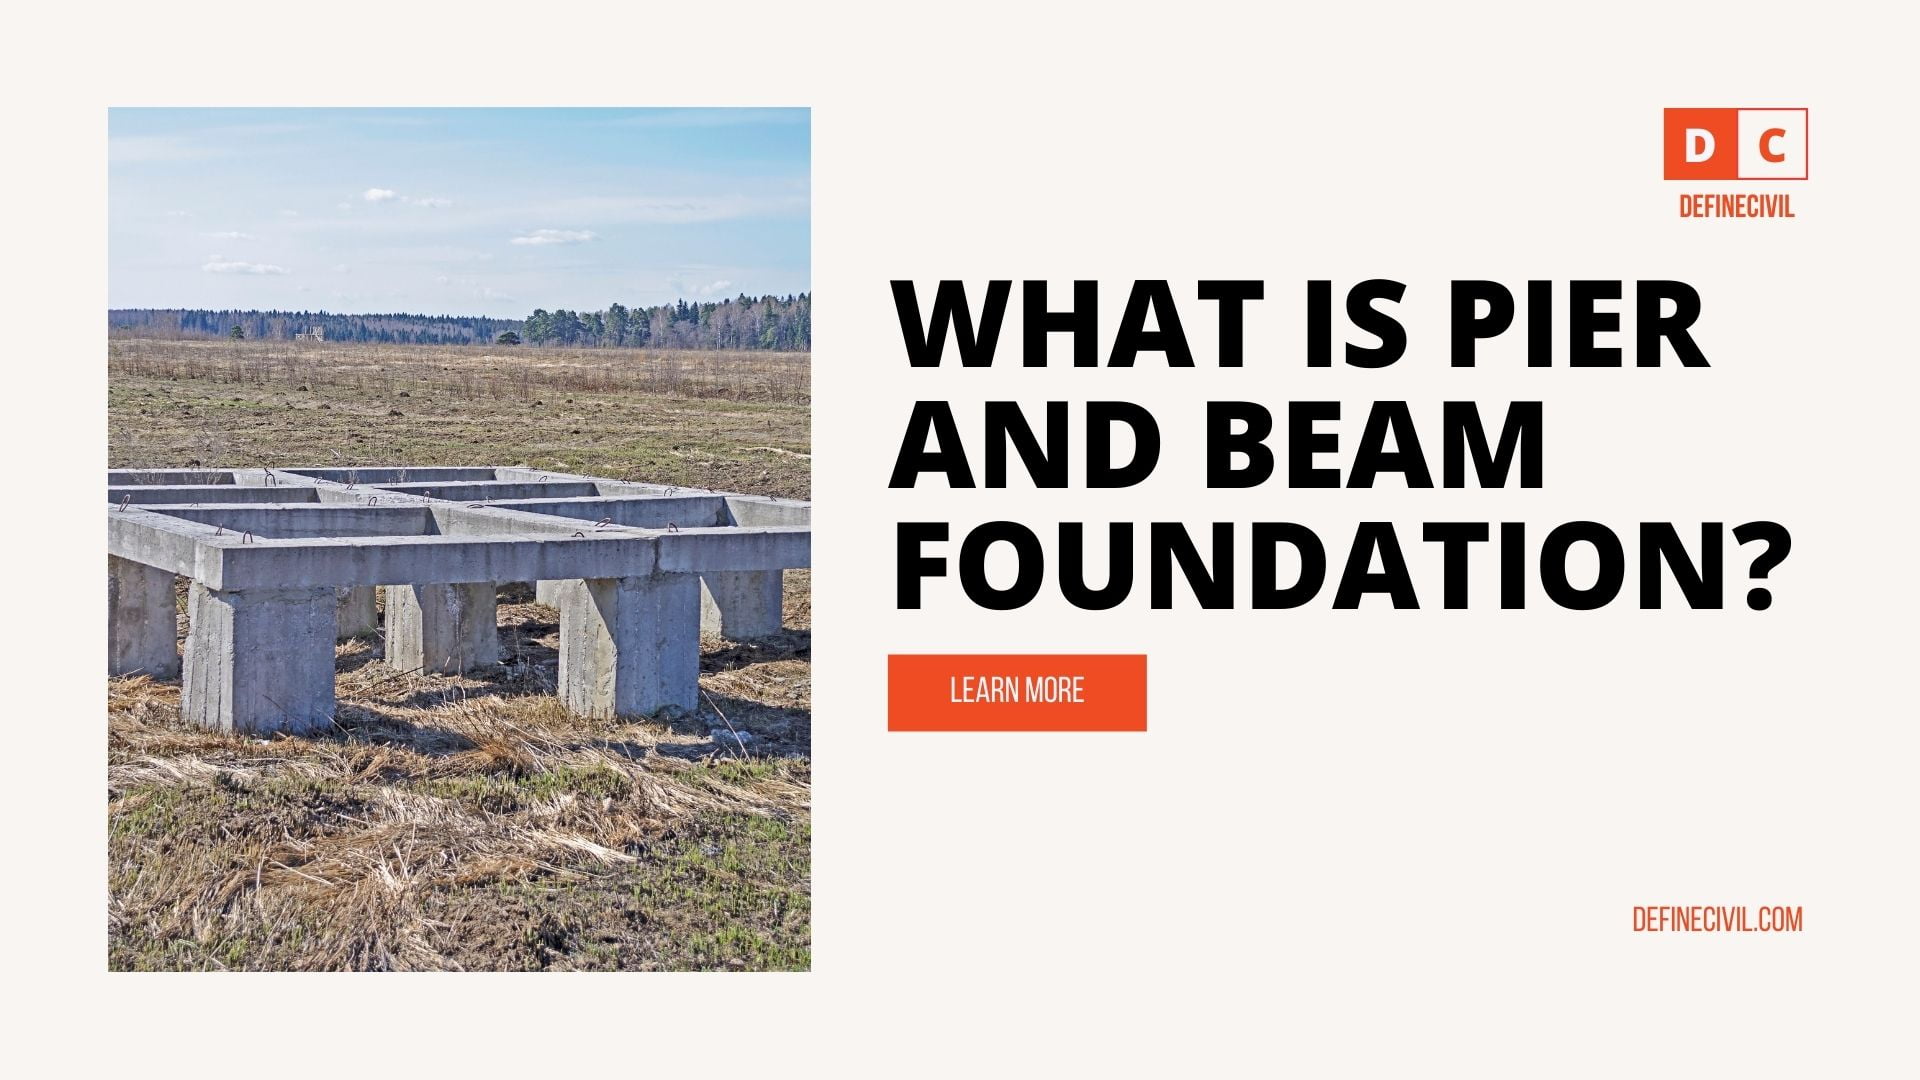 What is pier and Beam foundation?